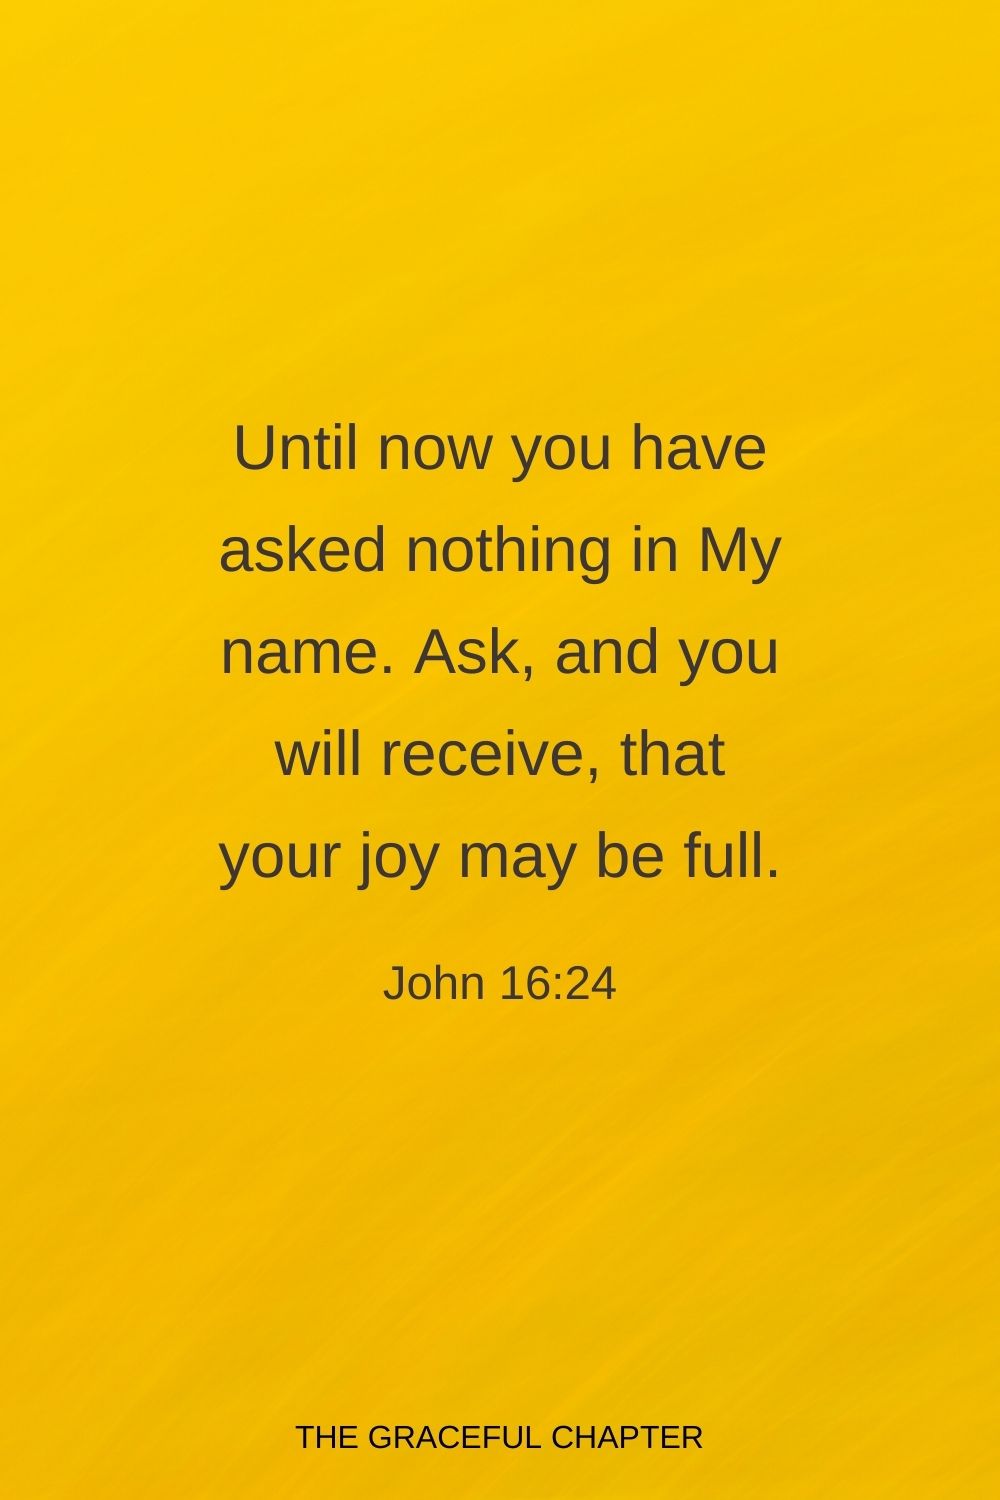 Until now you have asked nothing in My name. Ask, and you will receive, that your joy may be full. John 16:24